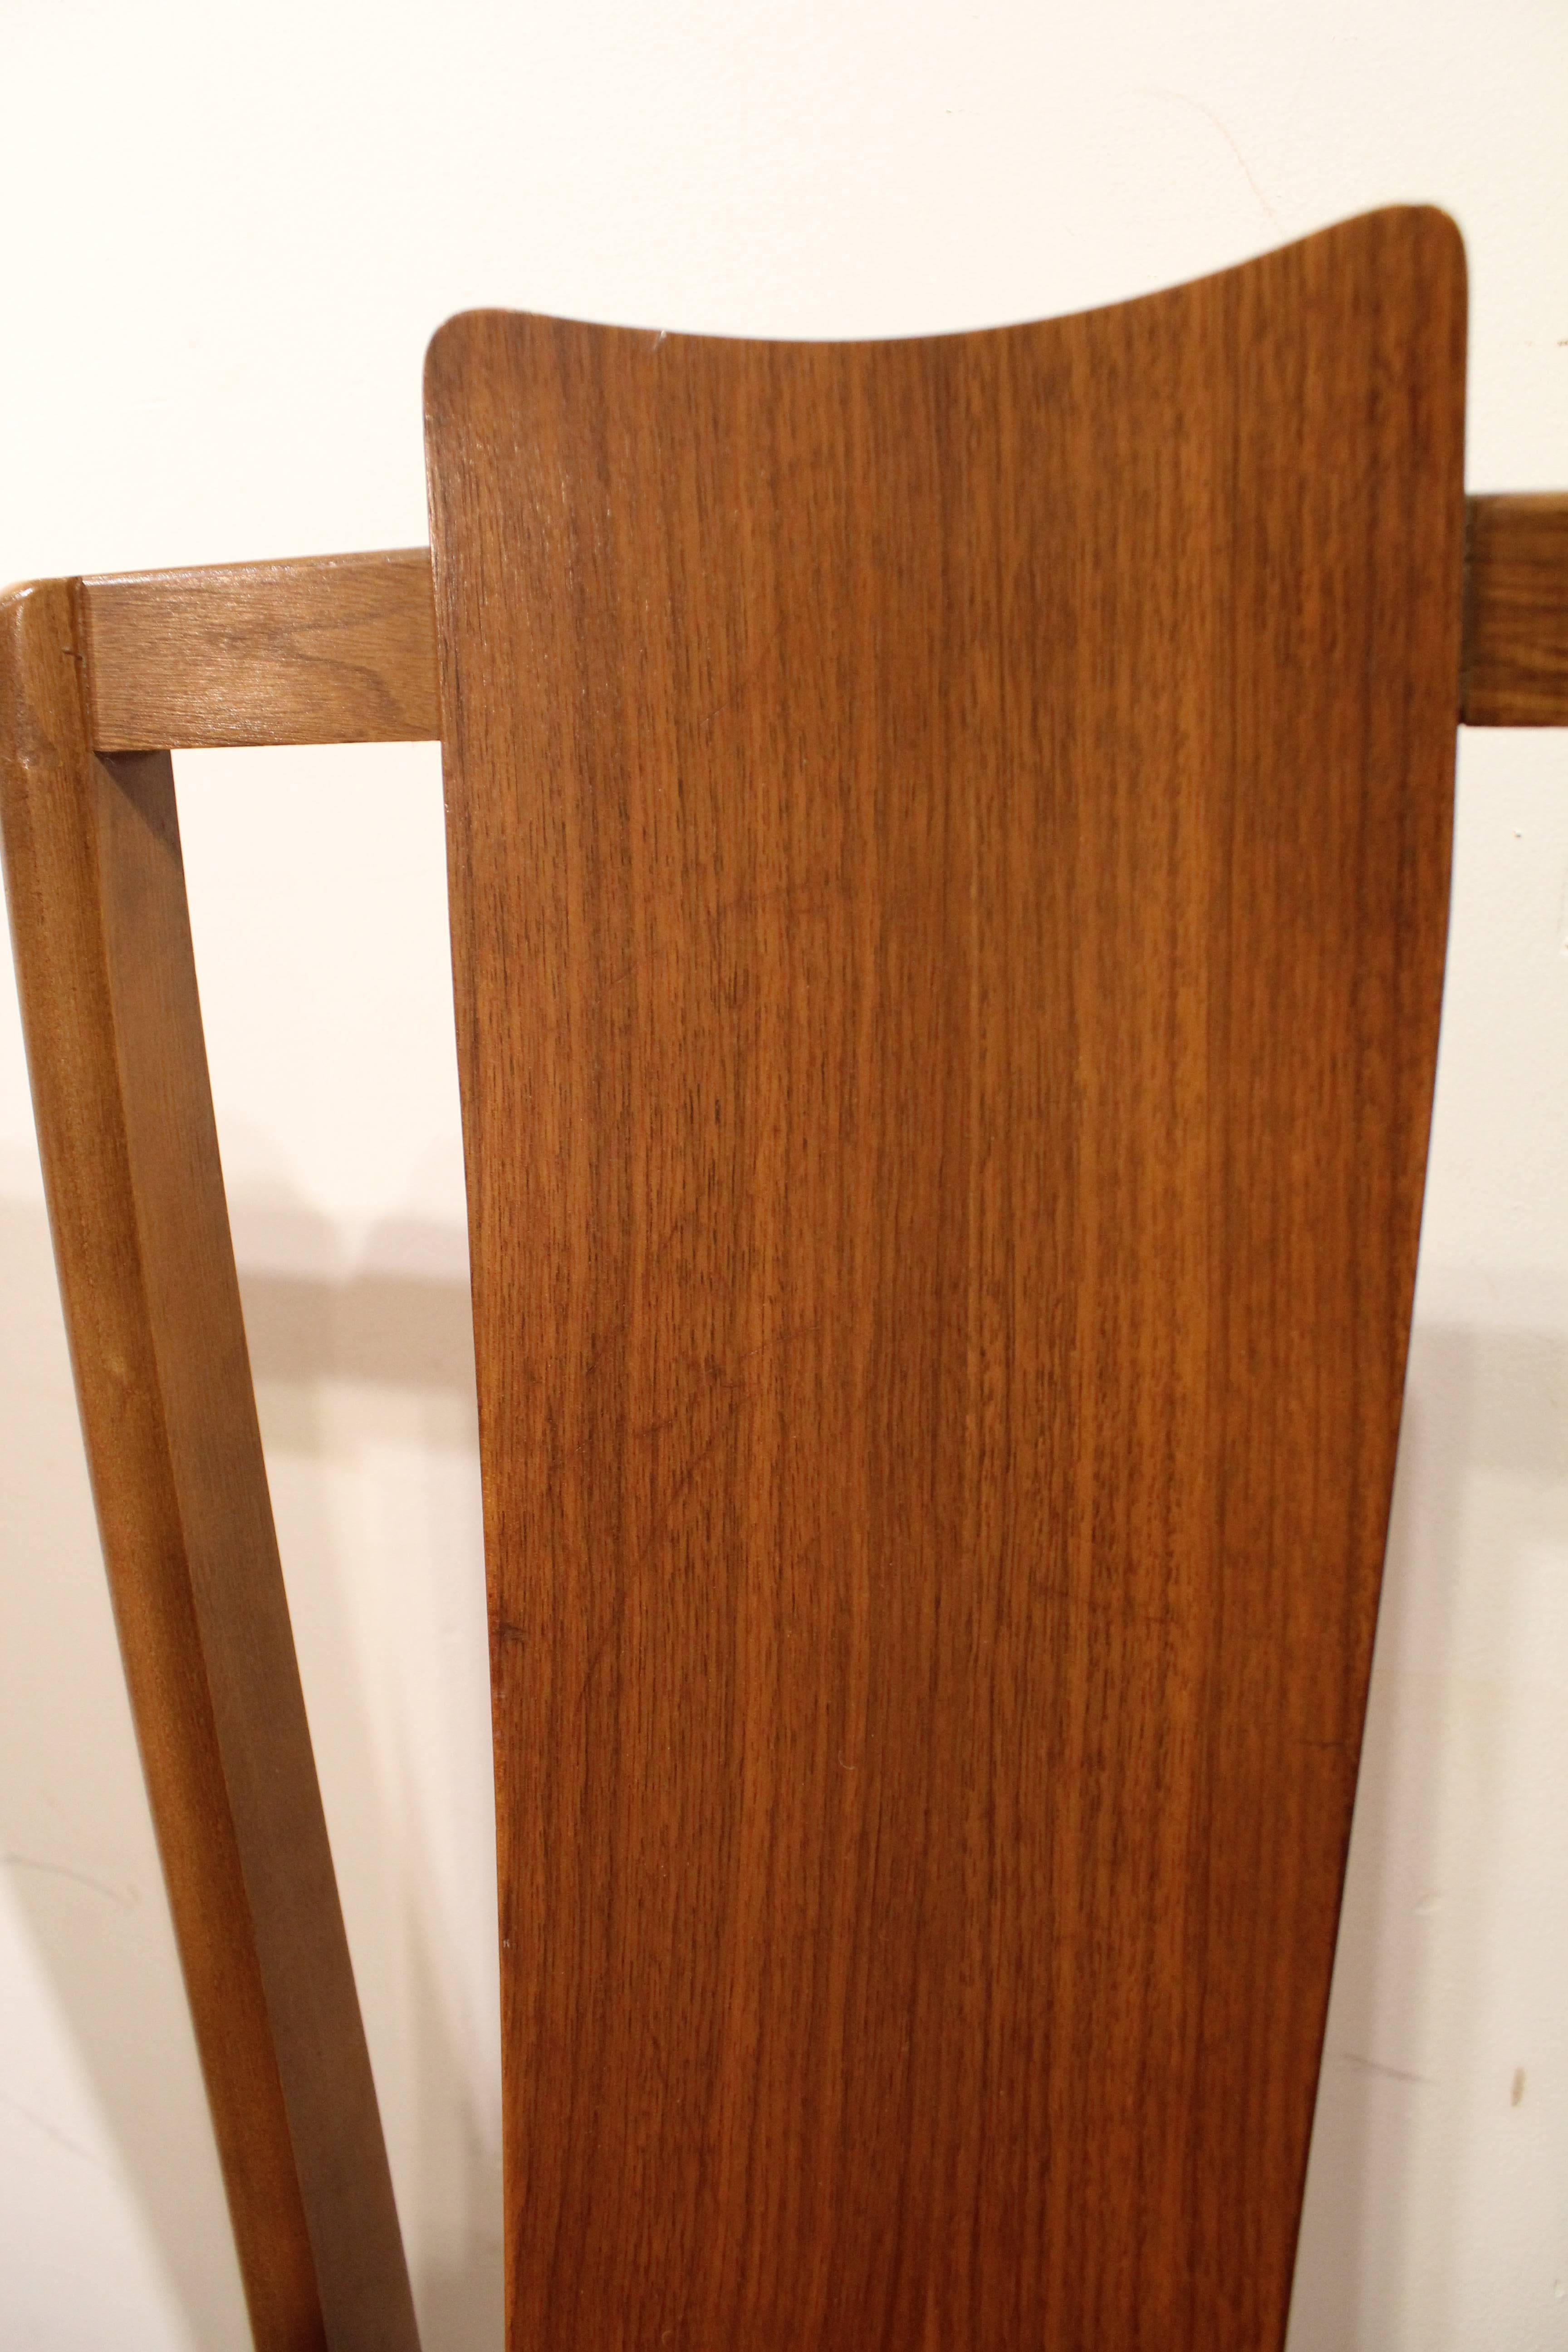 Walnut Set of Six Mid-Century Modern Floating Seat Dining Chairs